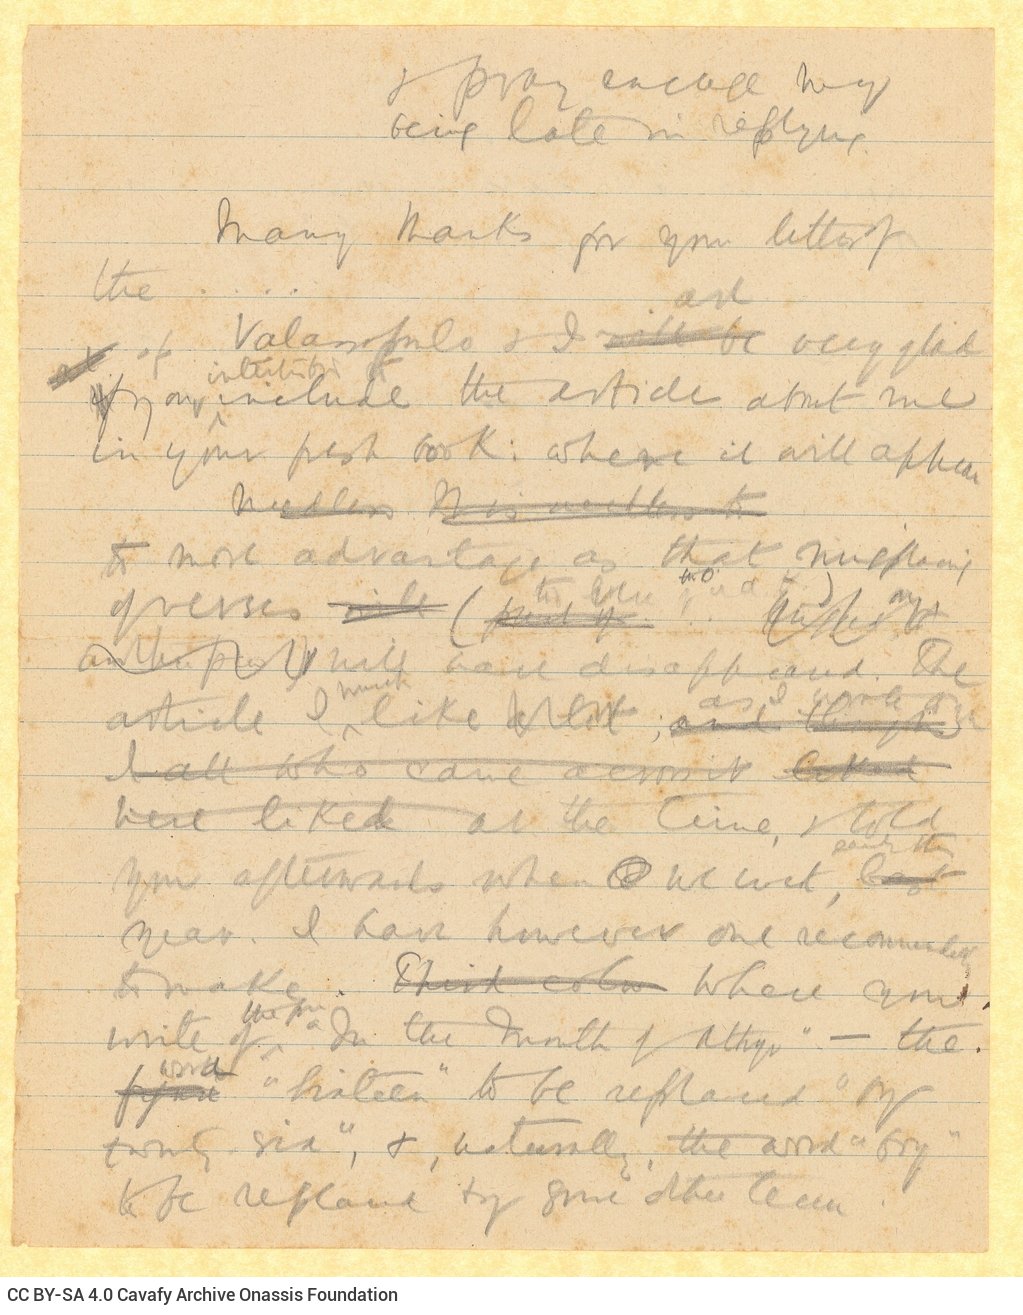 Handwritten copy of a letter by Cavafy to E. M. Forster on both sides of a sheet. Cavafy consents to the re-publication of an